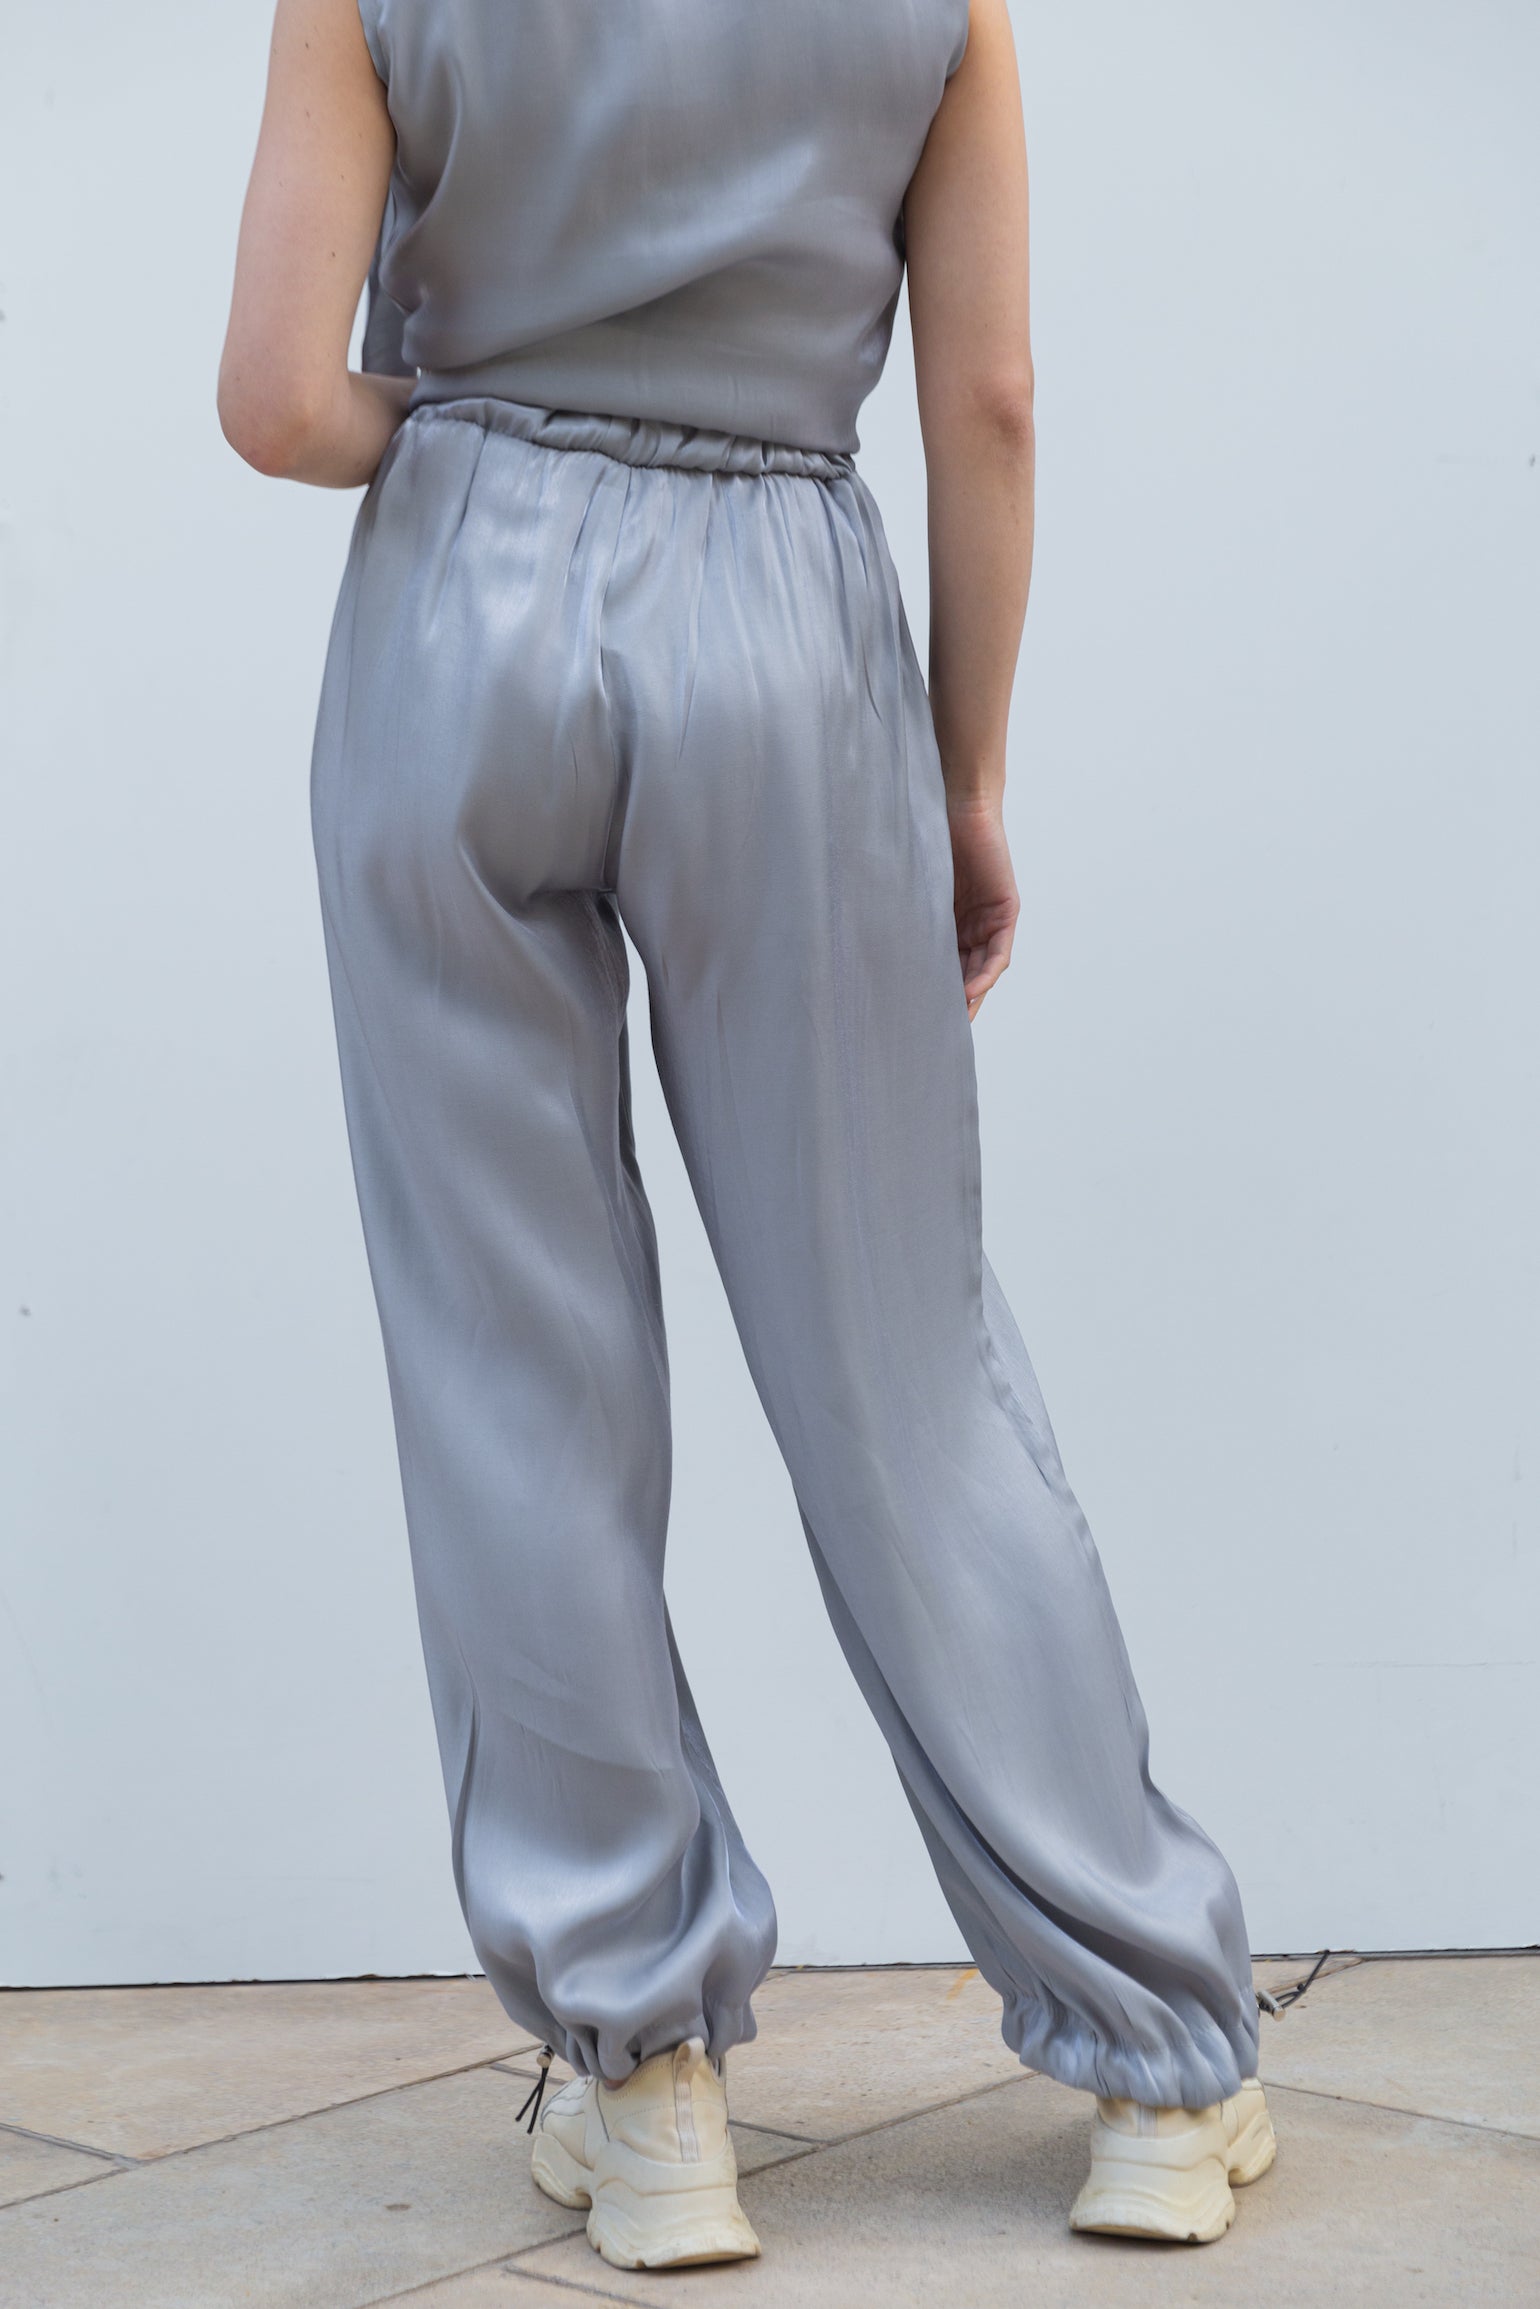 Shimmery pants in grey